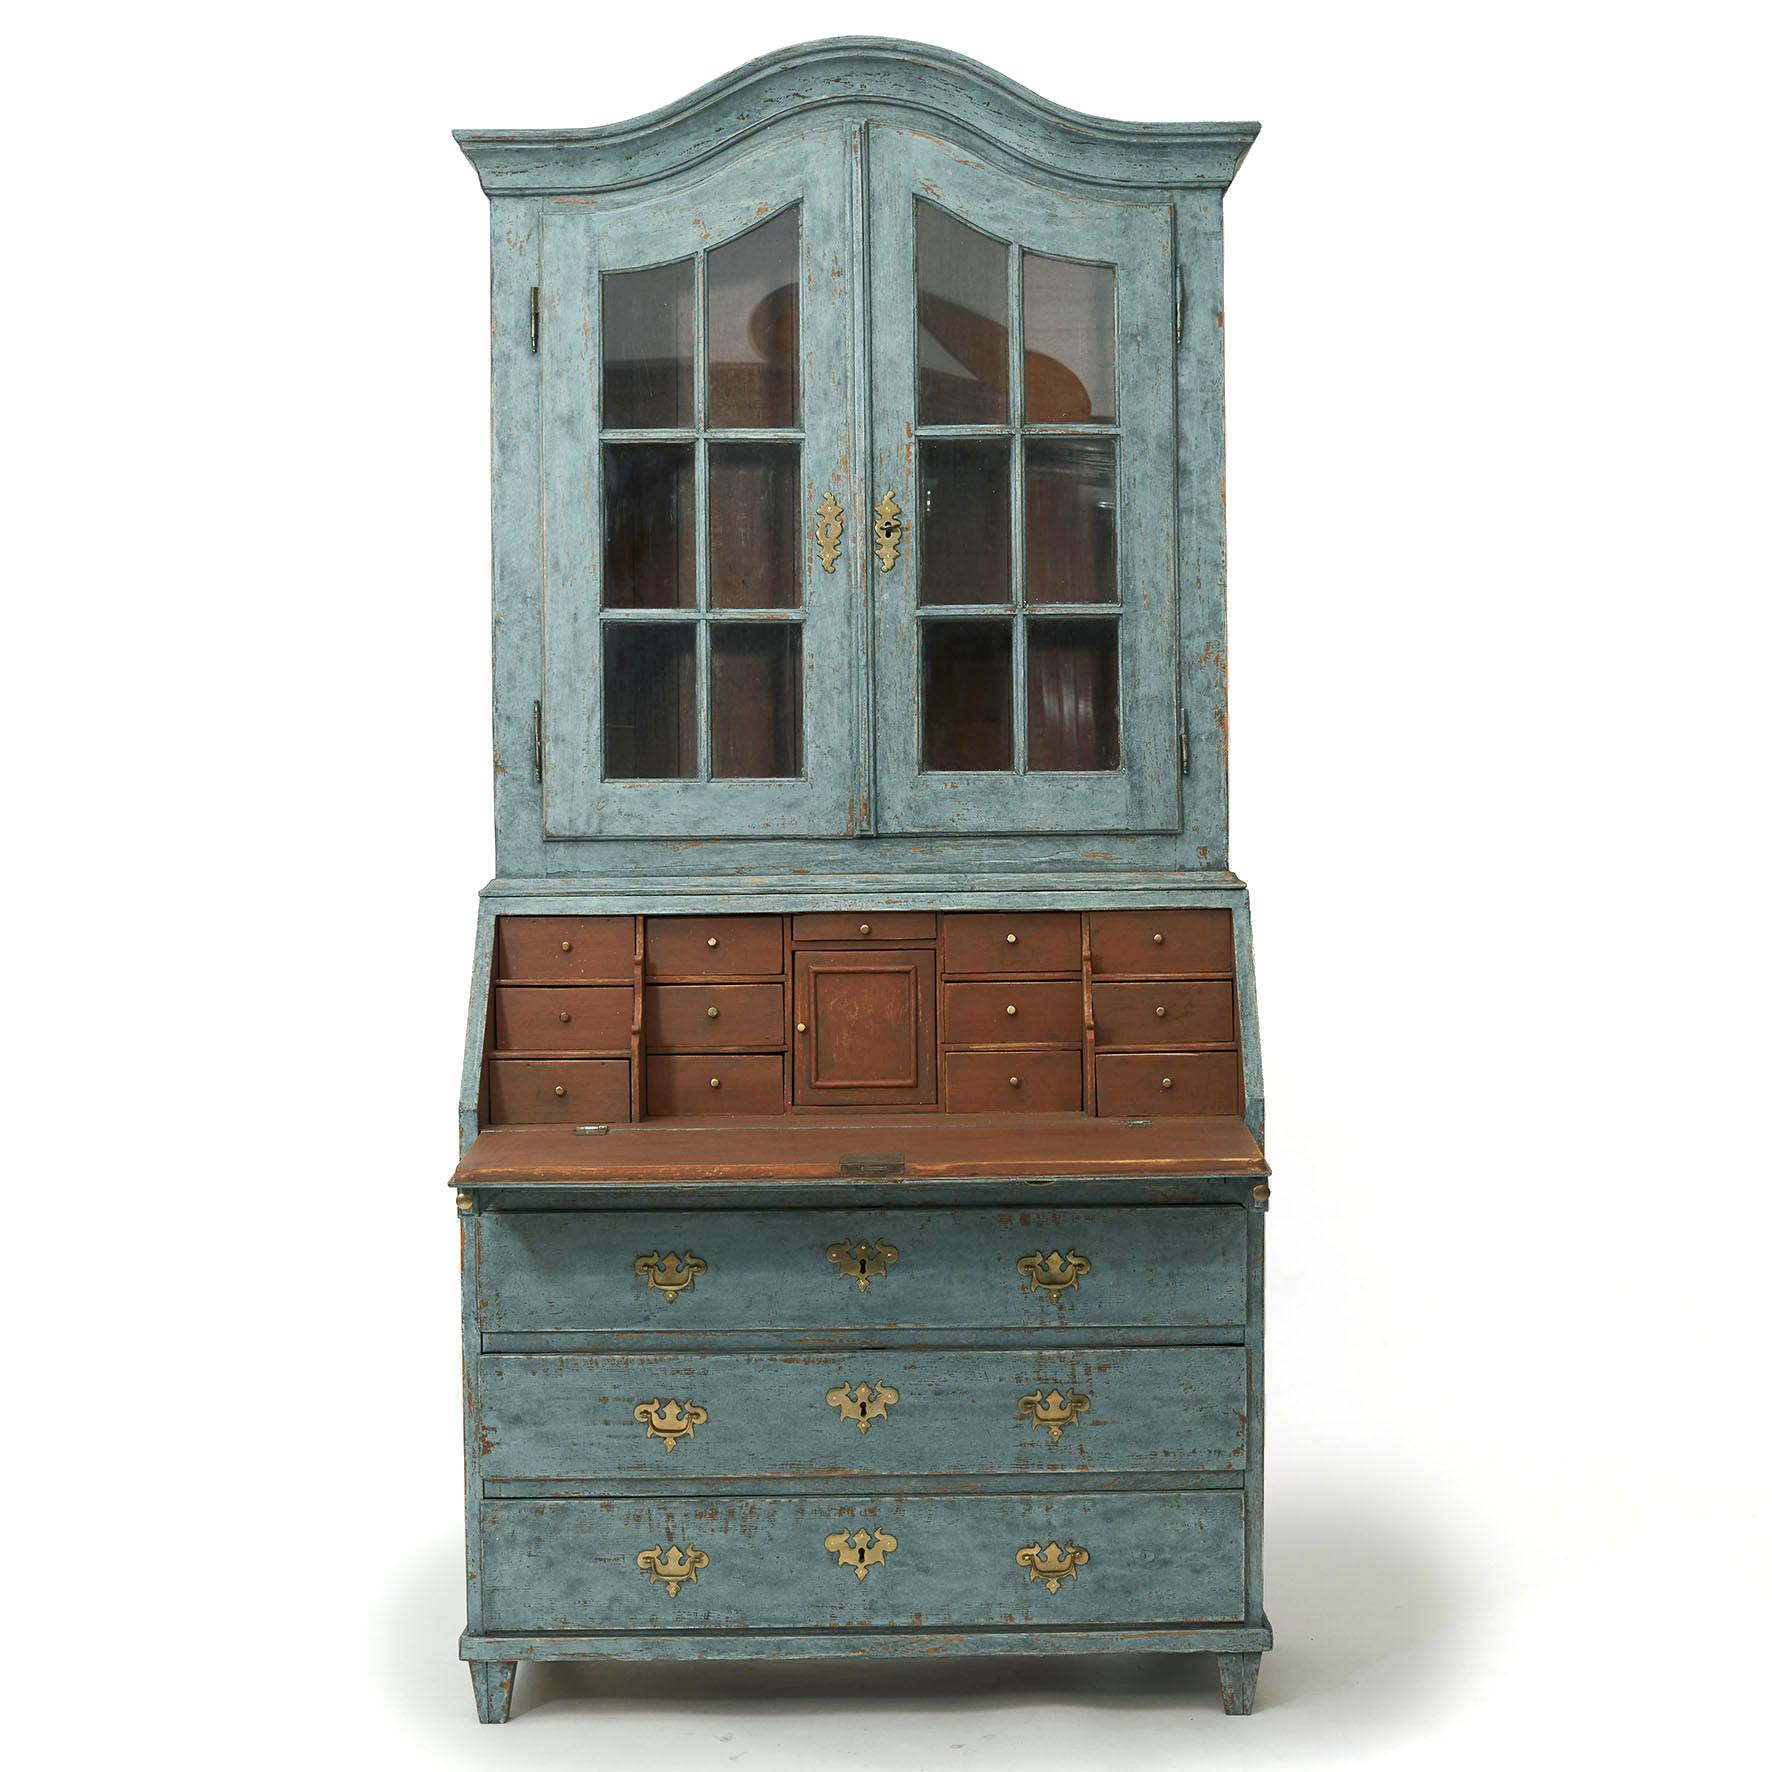 Swedish rococo style bureau in beautiful blue color.
Wall cabinet with a pair of barred glass doors behind which 2 shelves, inside painted in Pompeii red.
Bottom part with sloping writing flap, behind which numerous drawers, painted in Pompeii red